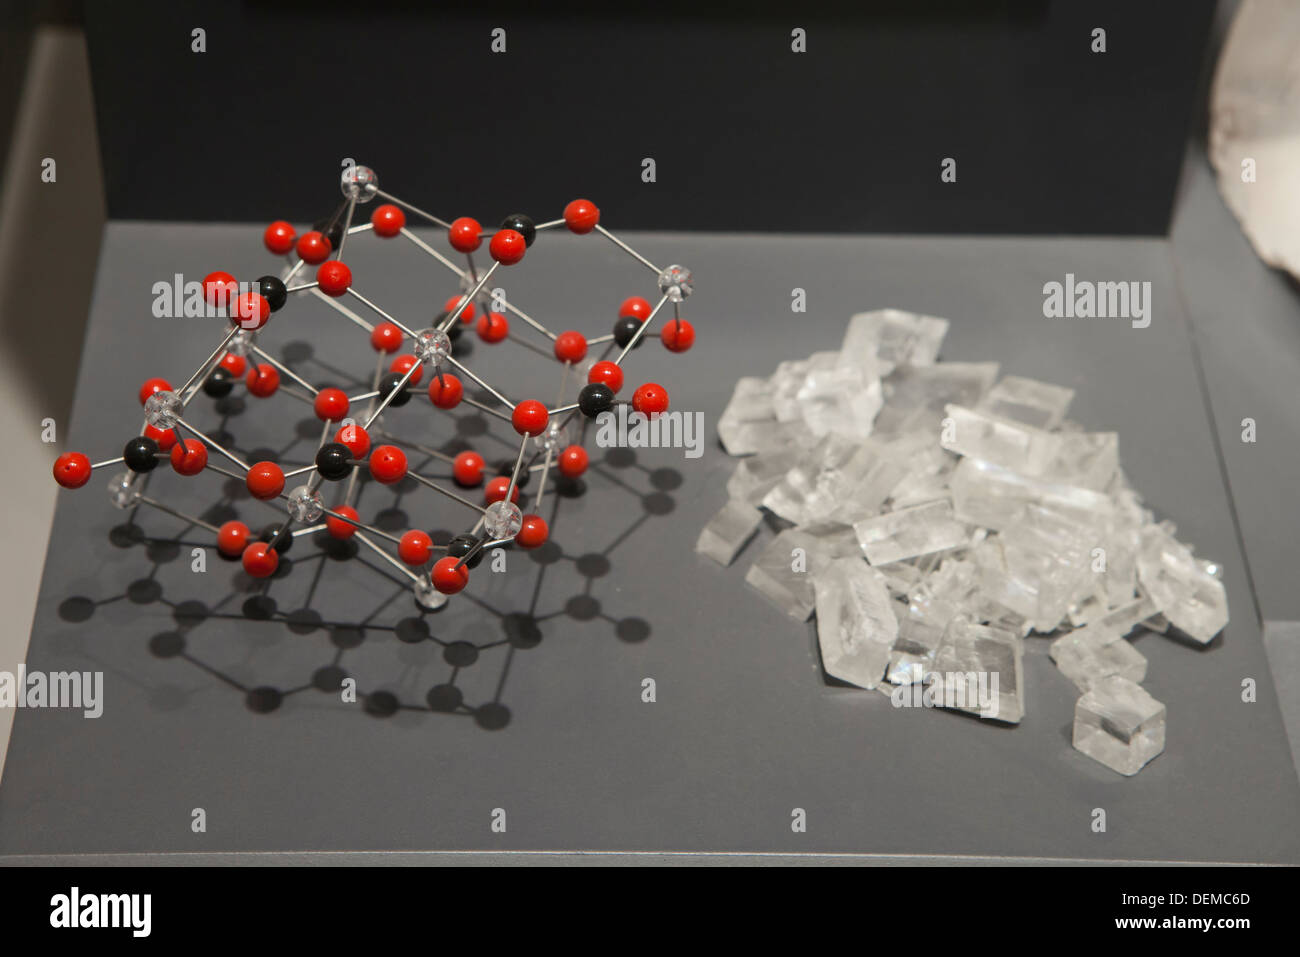 Calcite crystals and atomic structure model Stock Photo